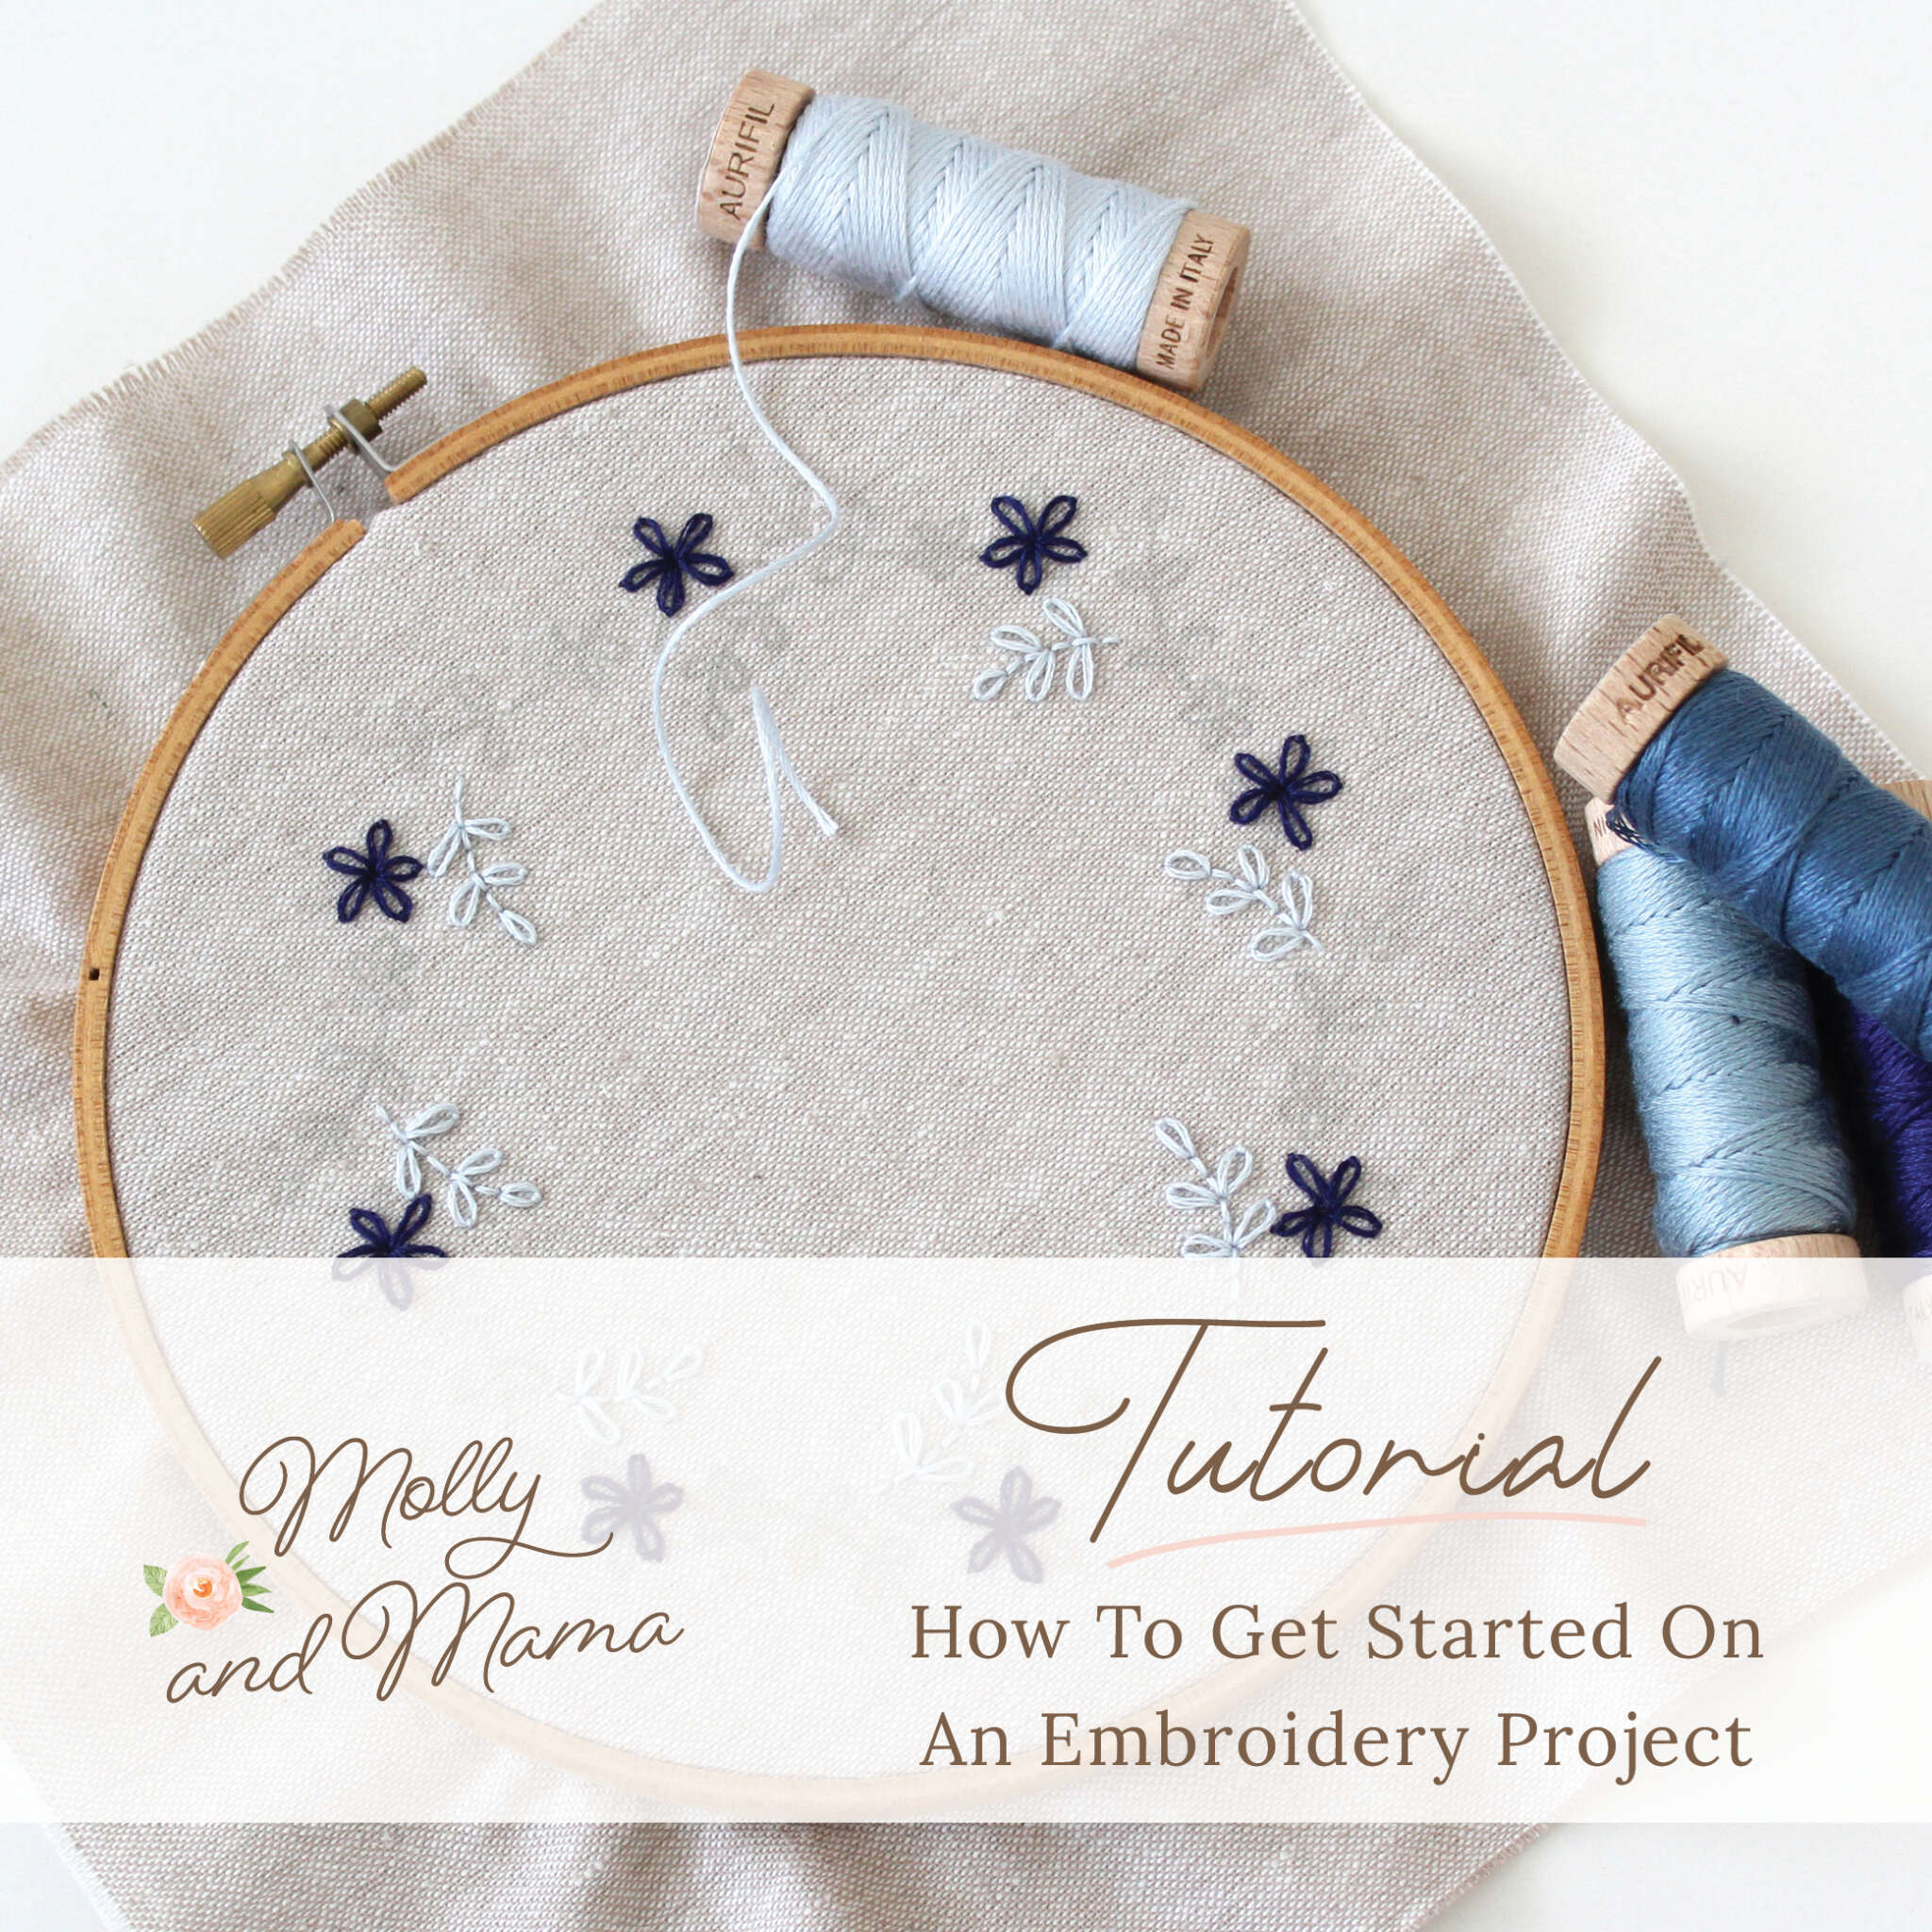 Tips for Choosing the Right Hand Embroidery Fabric